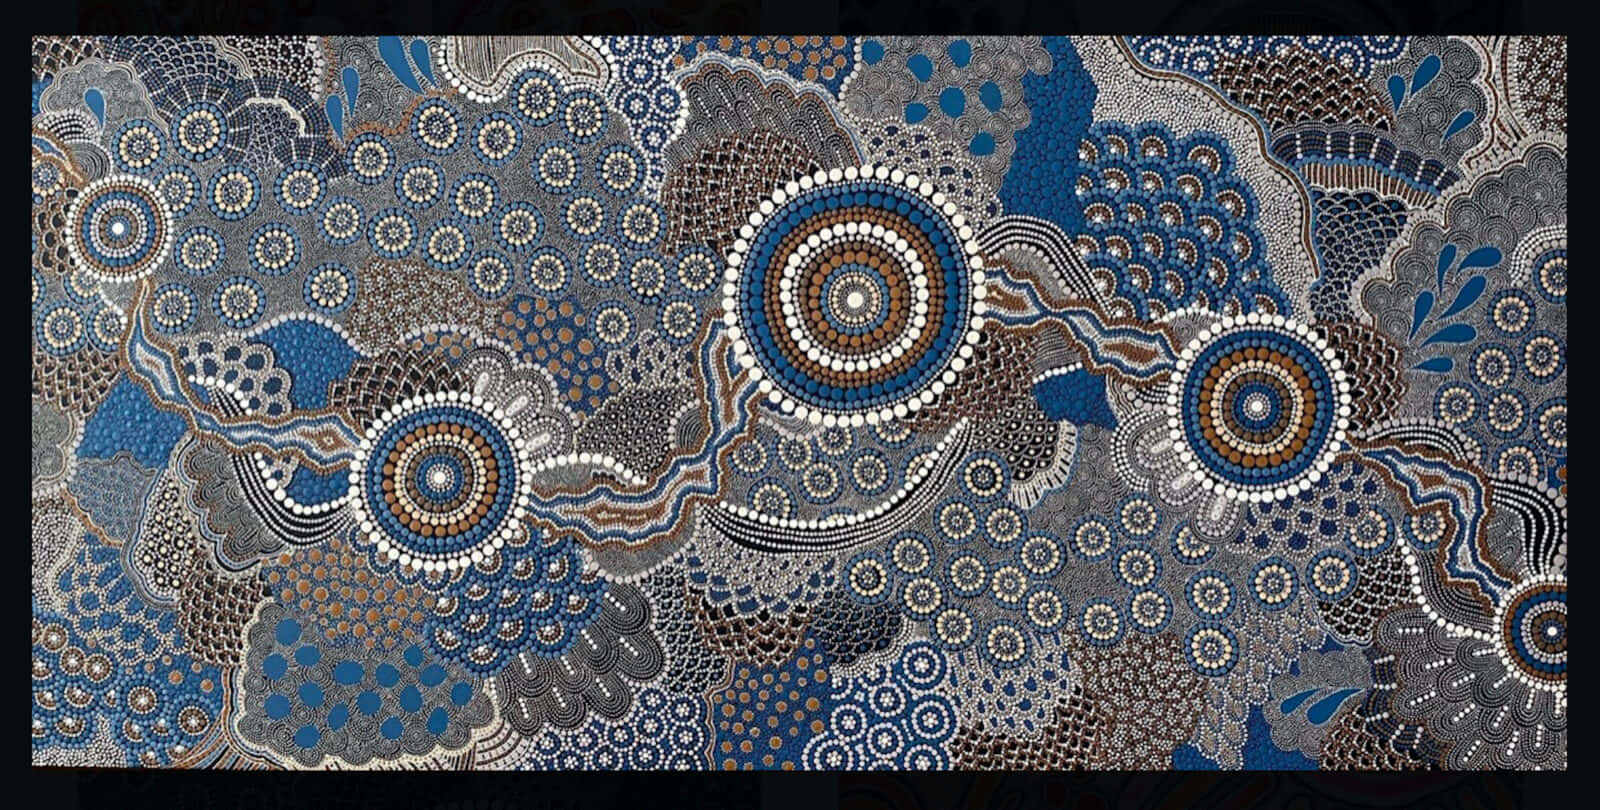 A Blue And Brown Painting With Circles And Swirls